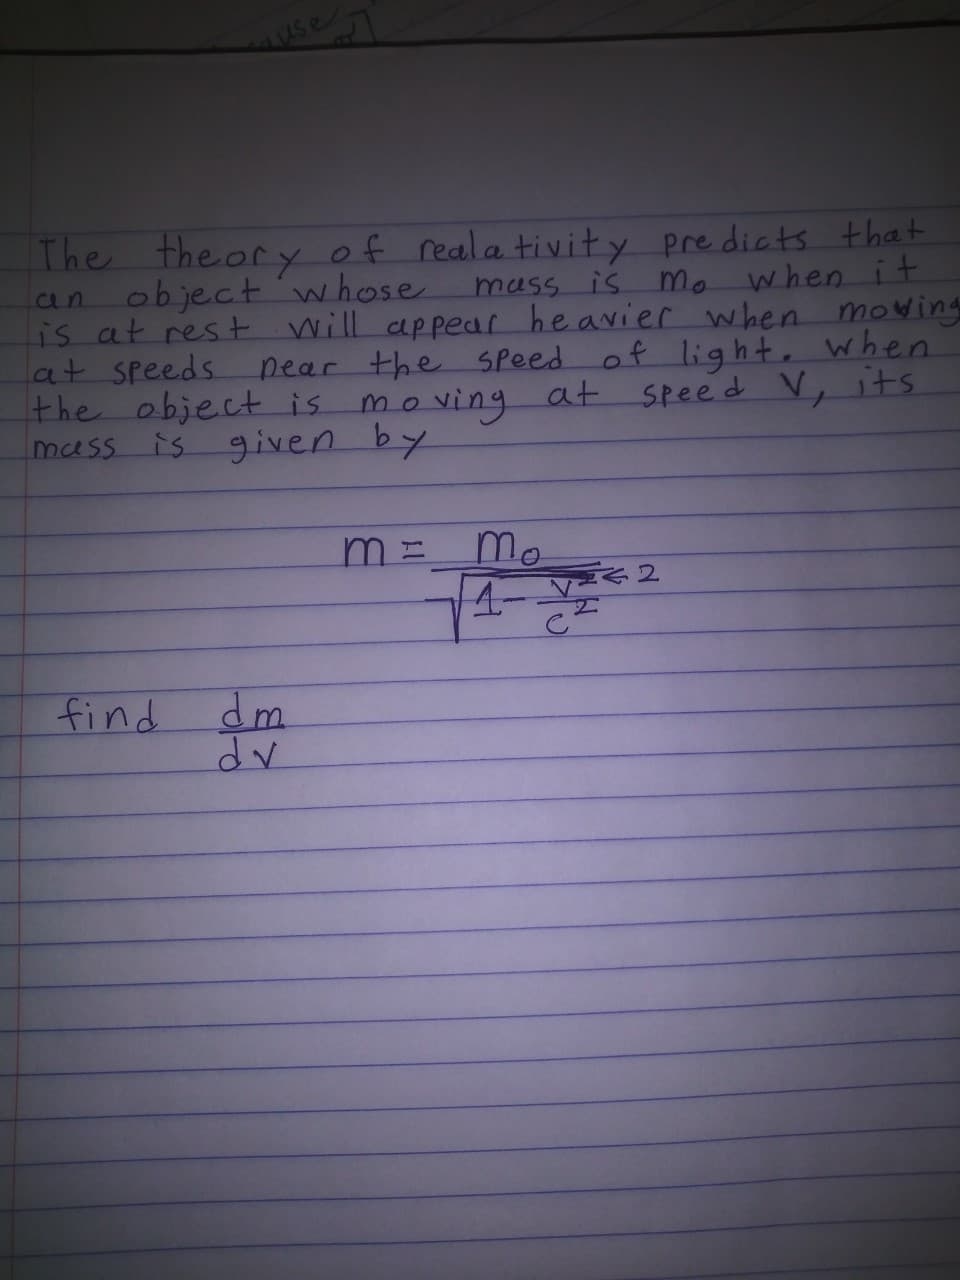 The theory of reala tivity pre dicts that
an objectwhose
is at rest will appear heavier when mowing
lat speeds.
the object is
muss is given by
mass is nmo when it
pear the Speed of light. when
moving at speed V, its
Mo
4-
find dm
